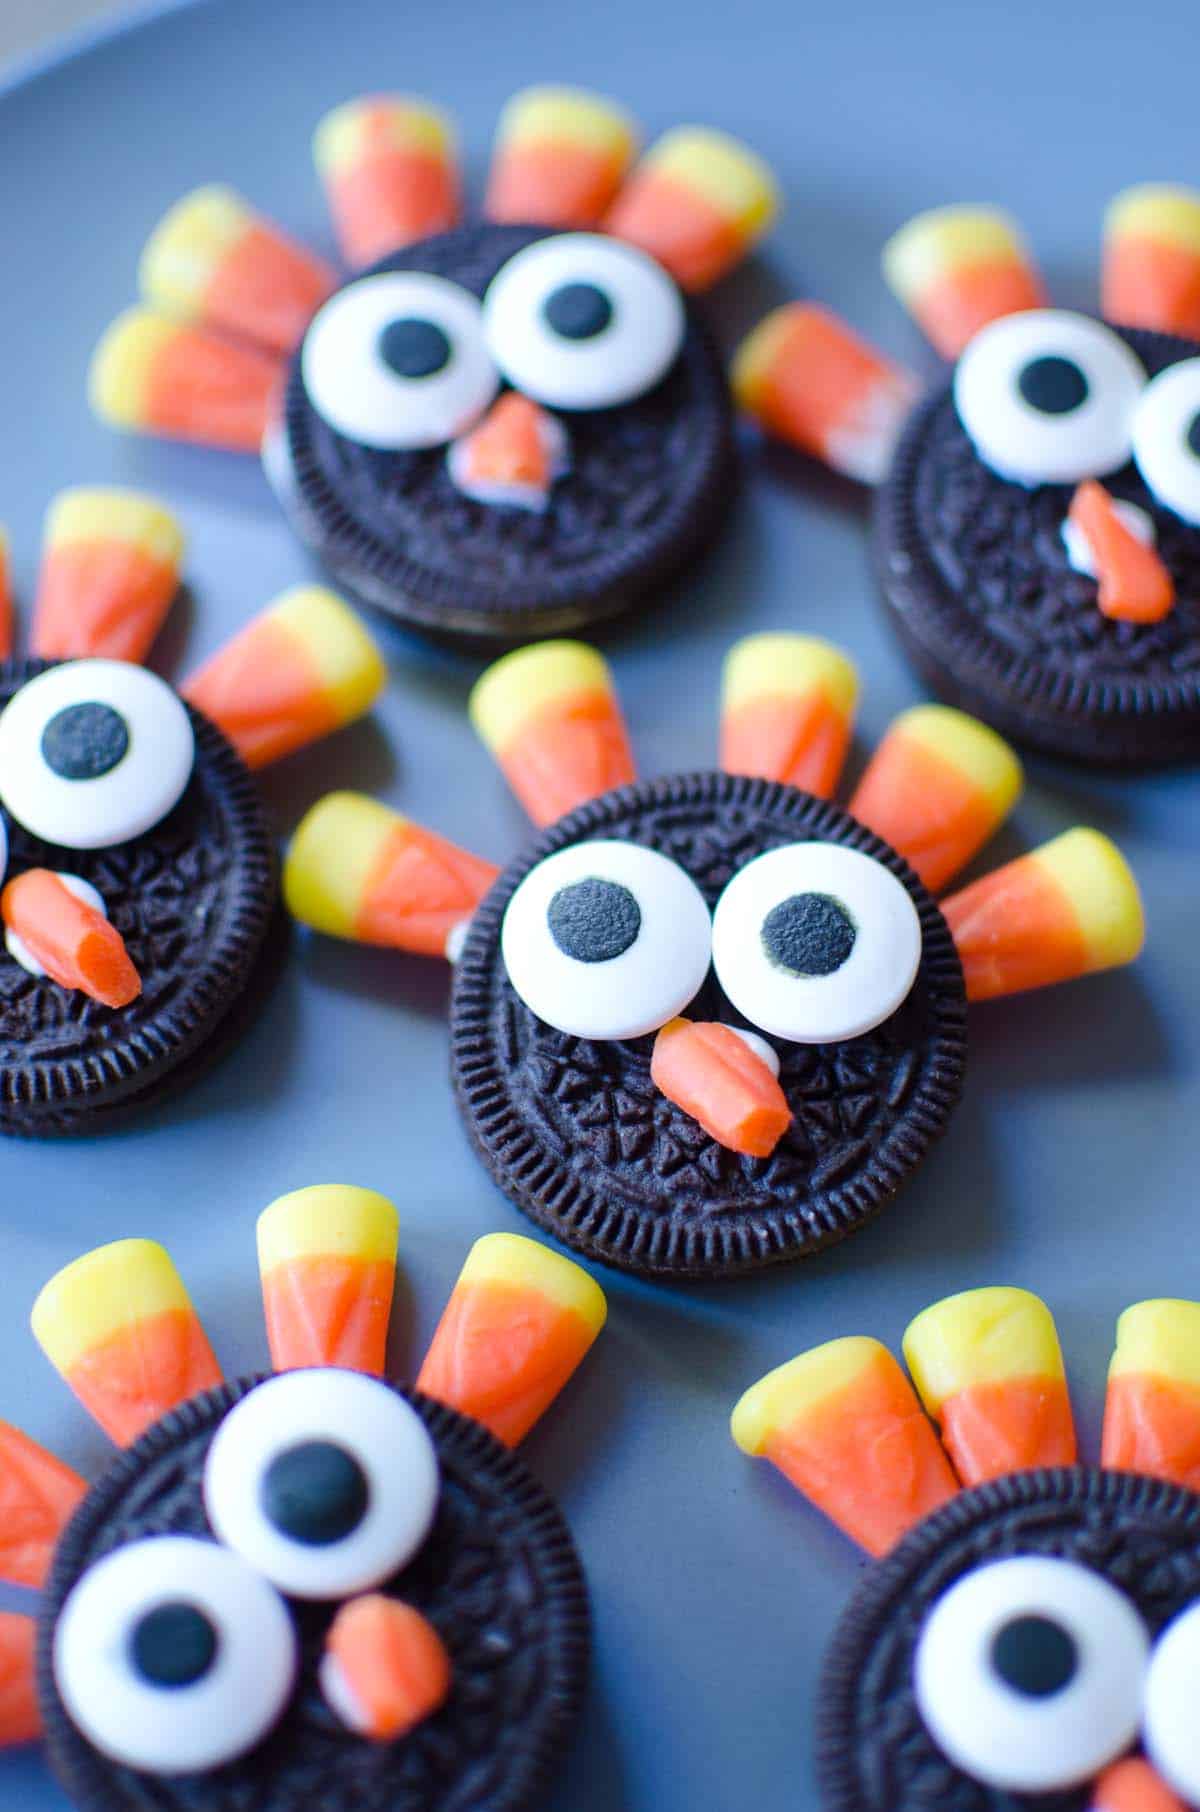 oreo cookies made to look like turkeys with candy corn feathers